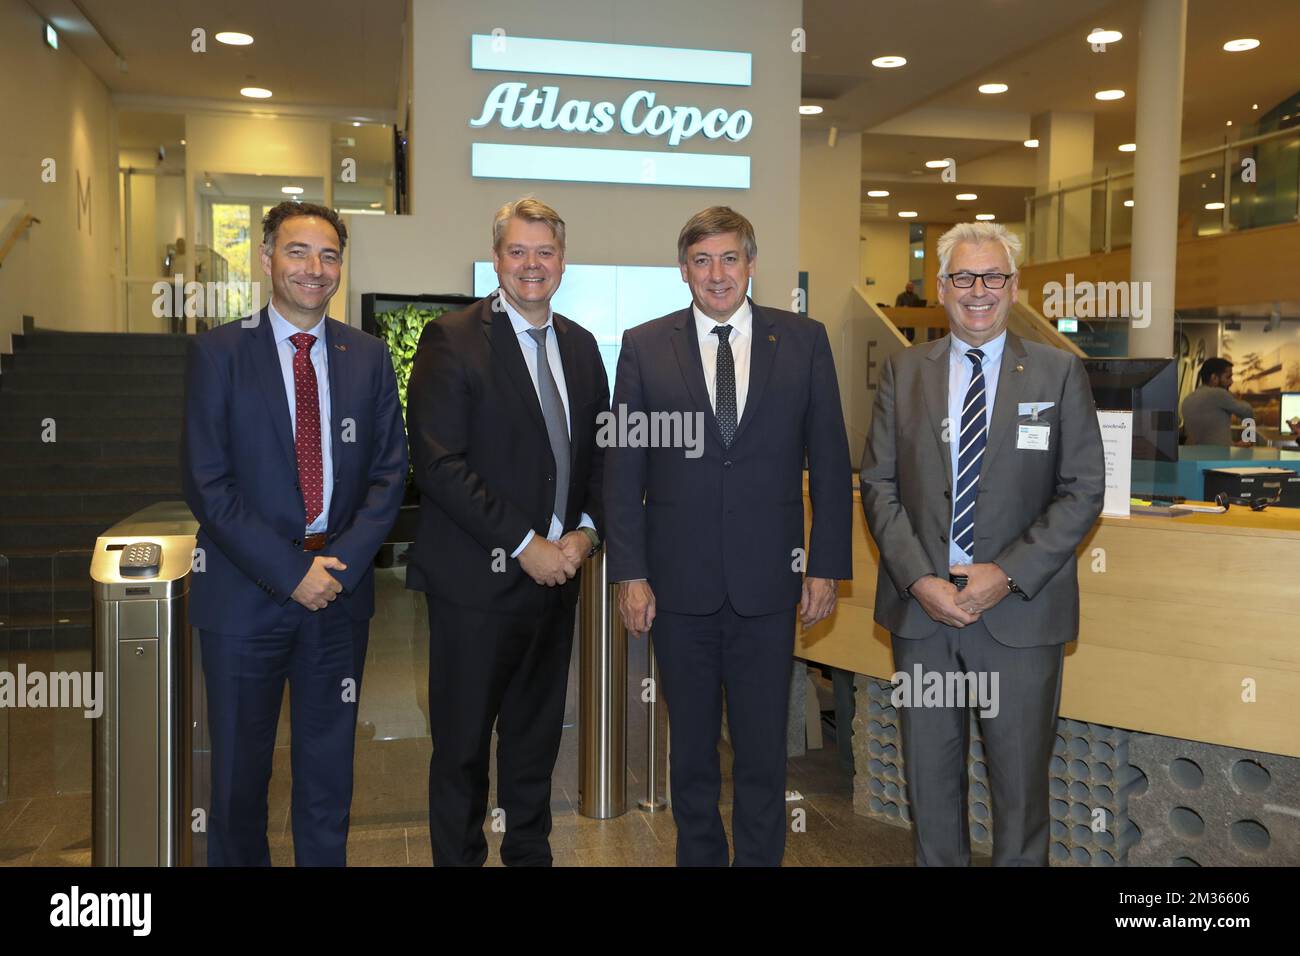 Peter Kinnart, Atlas Copco CEO Mats Rahmstrom, Flemish Minister President Jan Jambon and Alex Bongaerts pictured during a visit to the Atlas Copco Headquarters on the second day of an official visit to Sweden, in Stockholm, Tuesday 19 October 2021. BELGA PHOTO NICOLAS MAETERLINCK Stock Photo